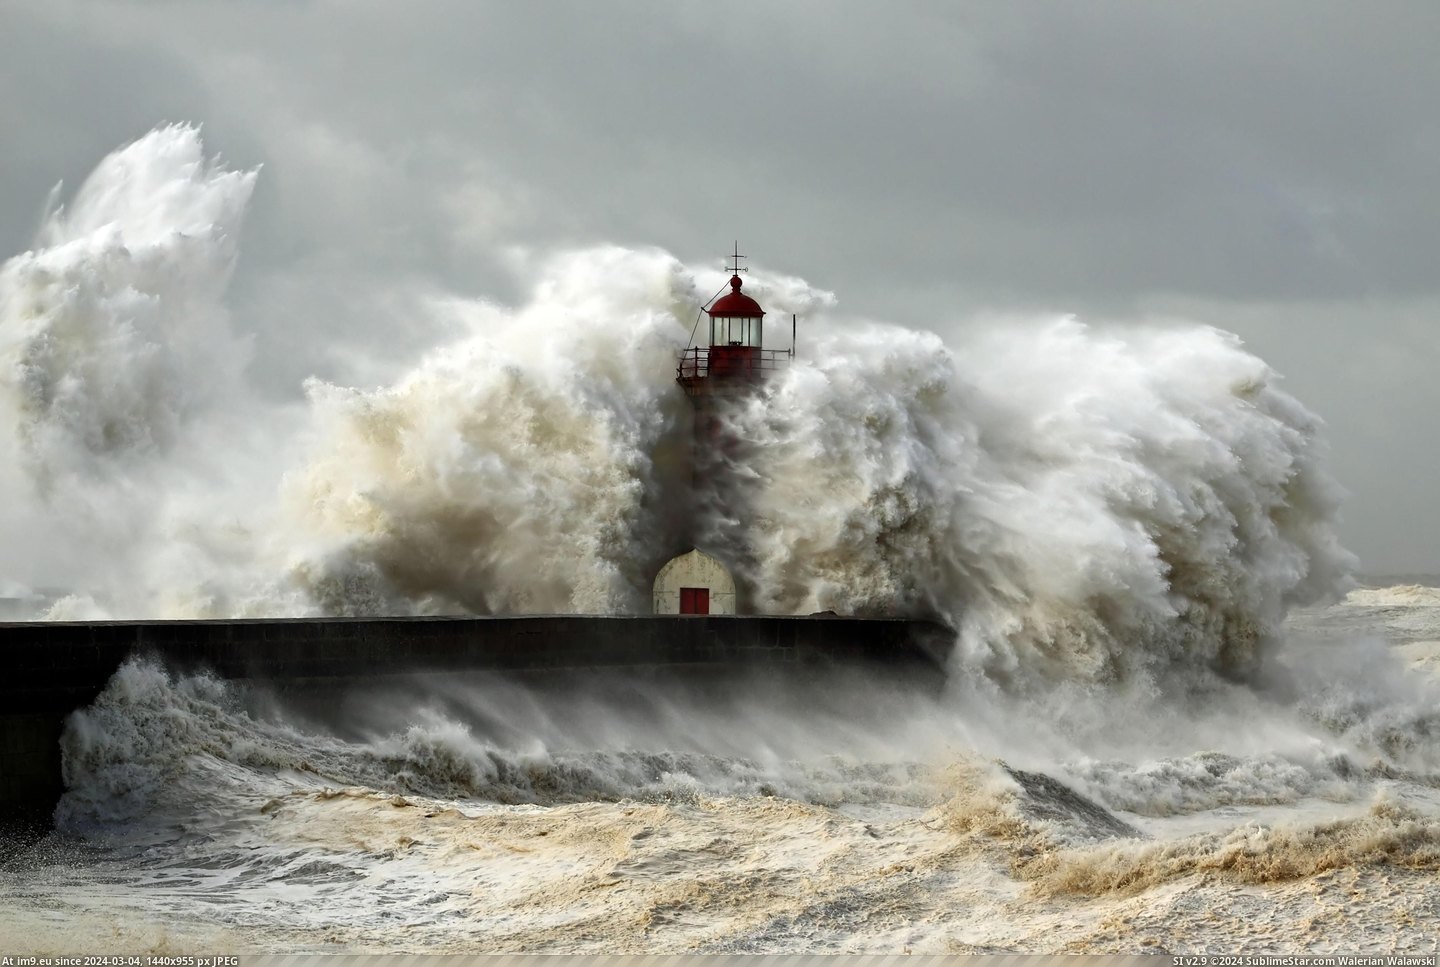 #Storm  #Lighthouse [Pics] Lighthouse in the Storm Pic. (Изображение из альбом My r/PICS favs))